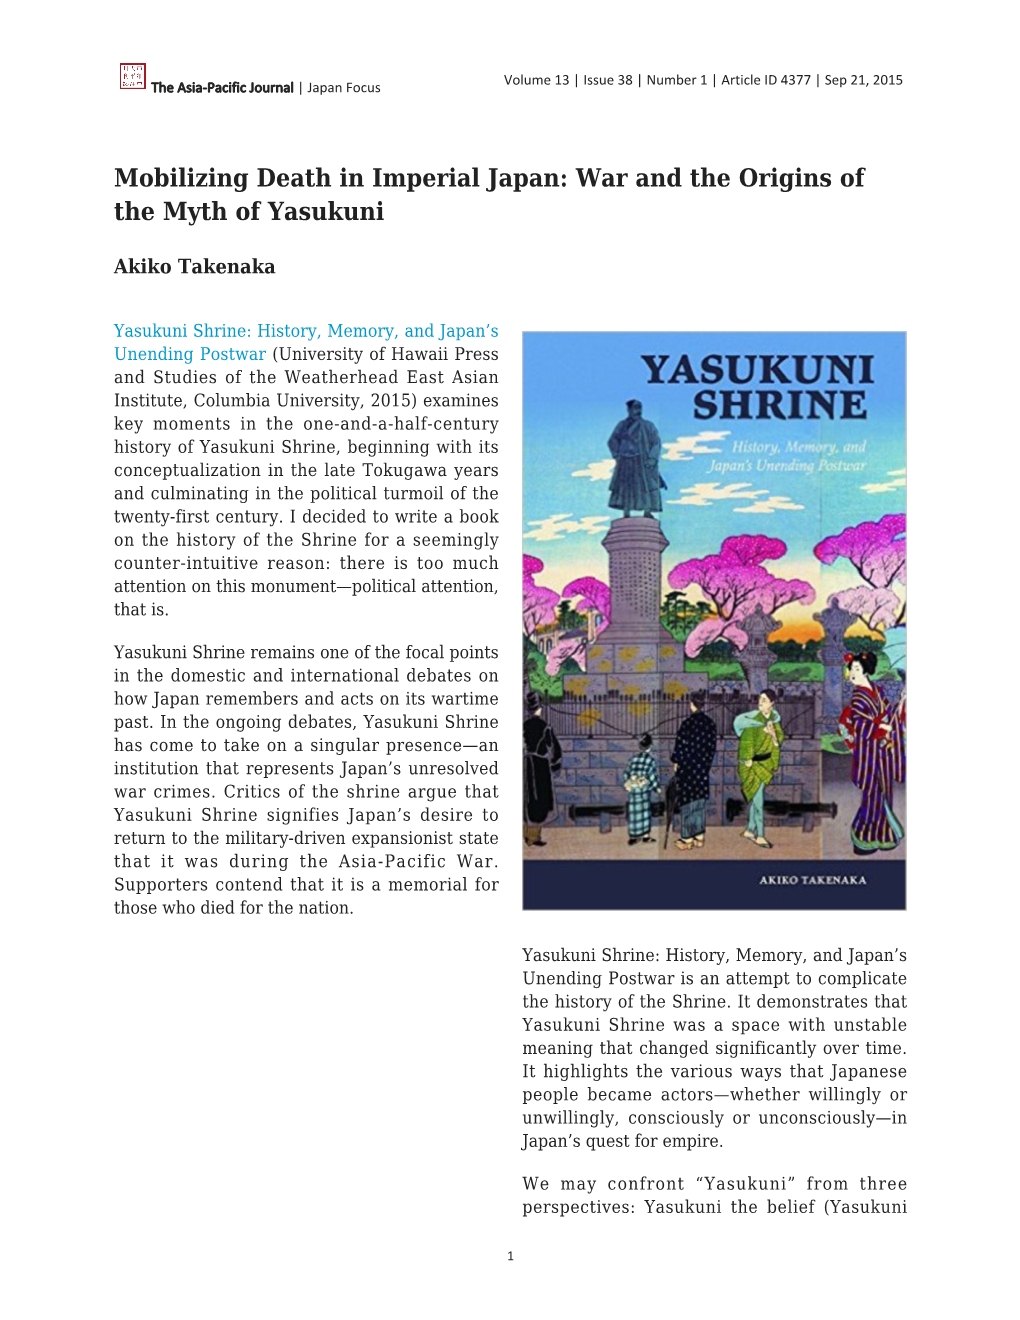 Mobilizing Death in Imperial Japan: War and the Origins of the Myth of Yasukuni